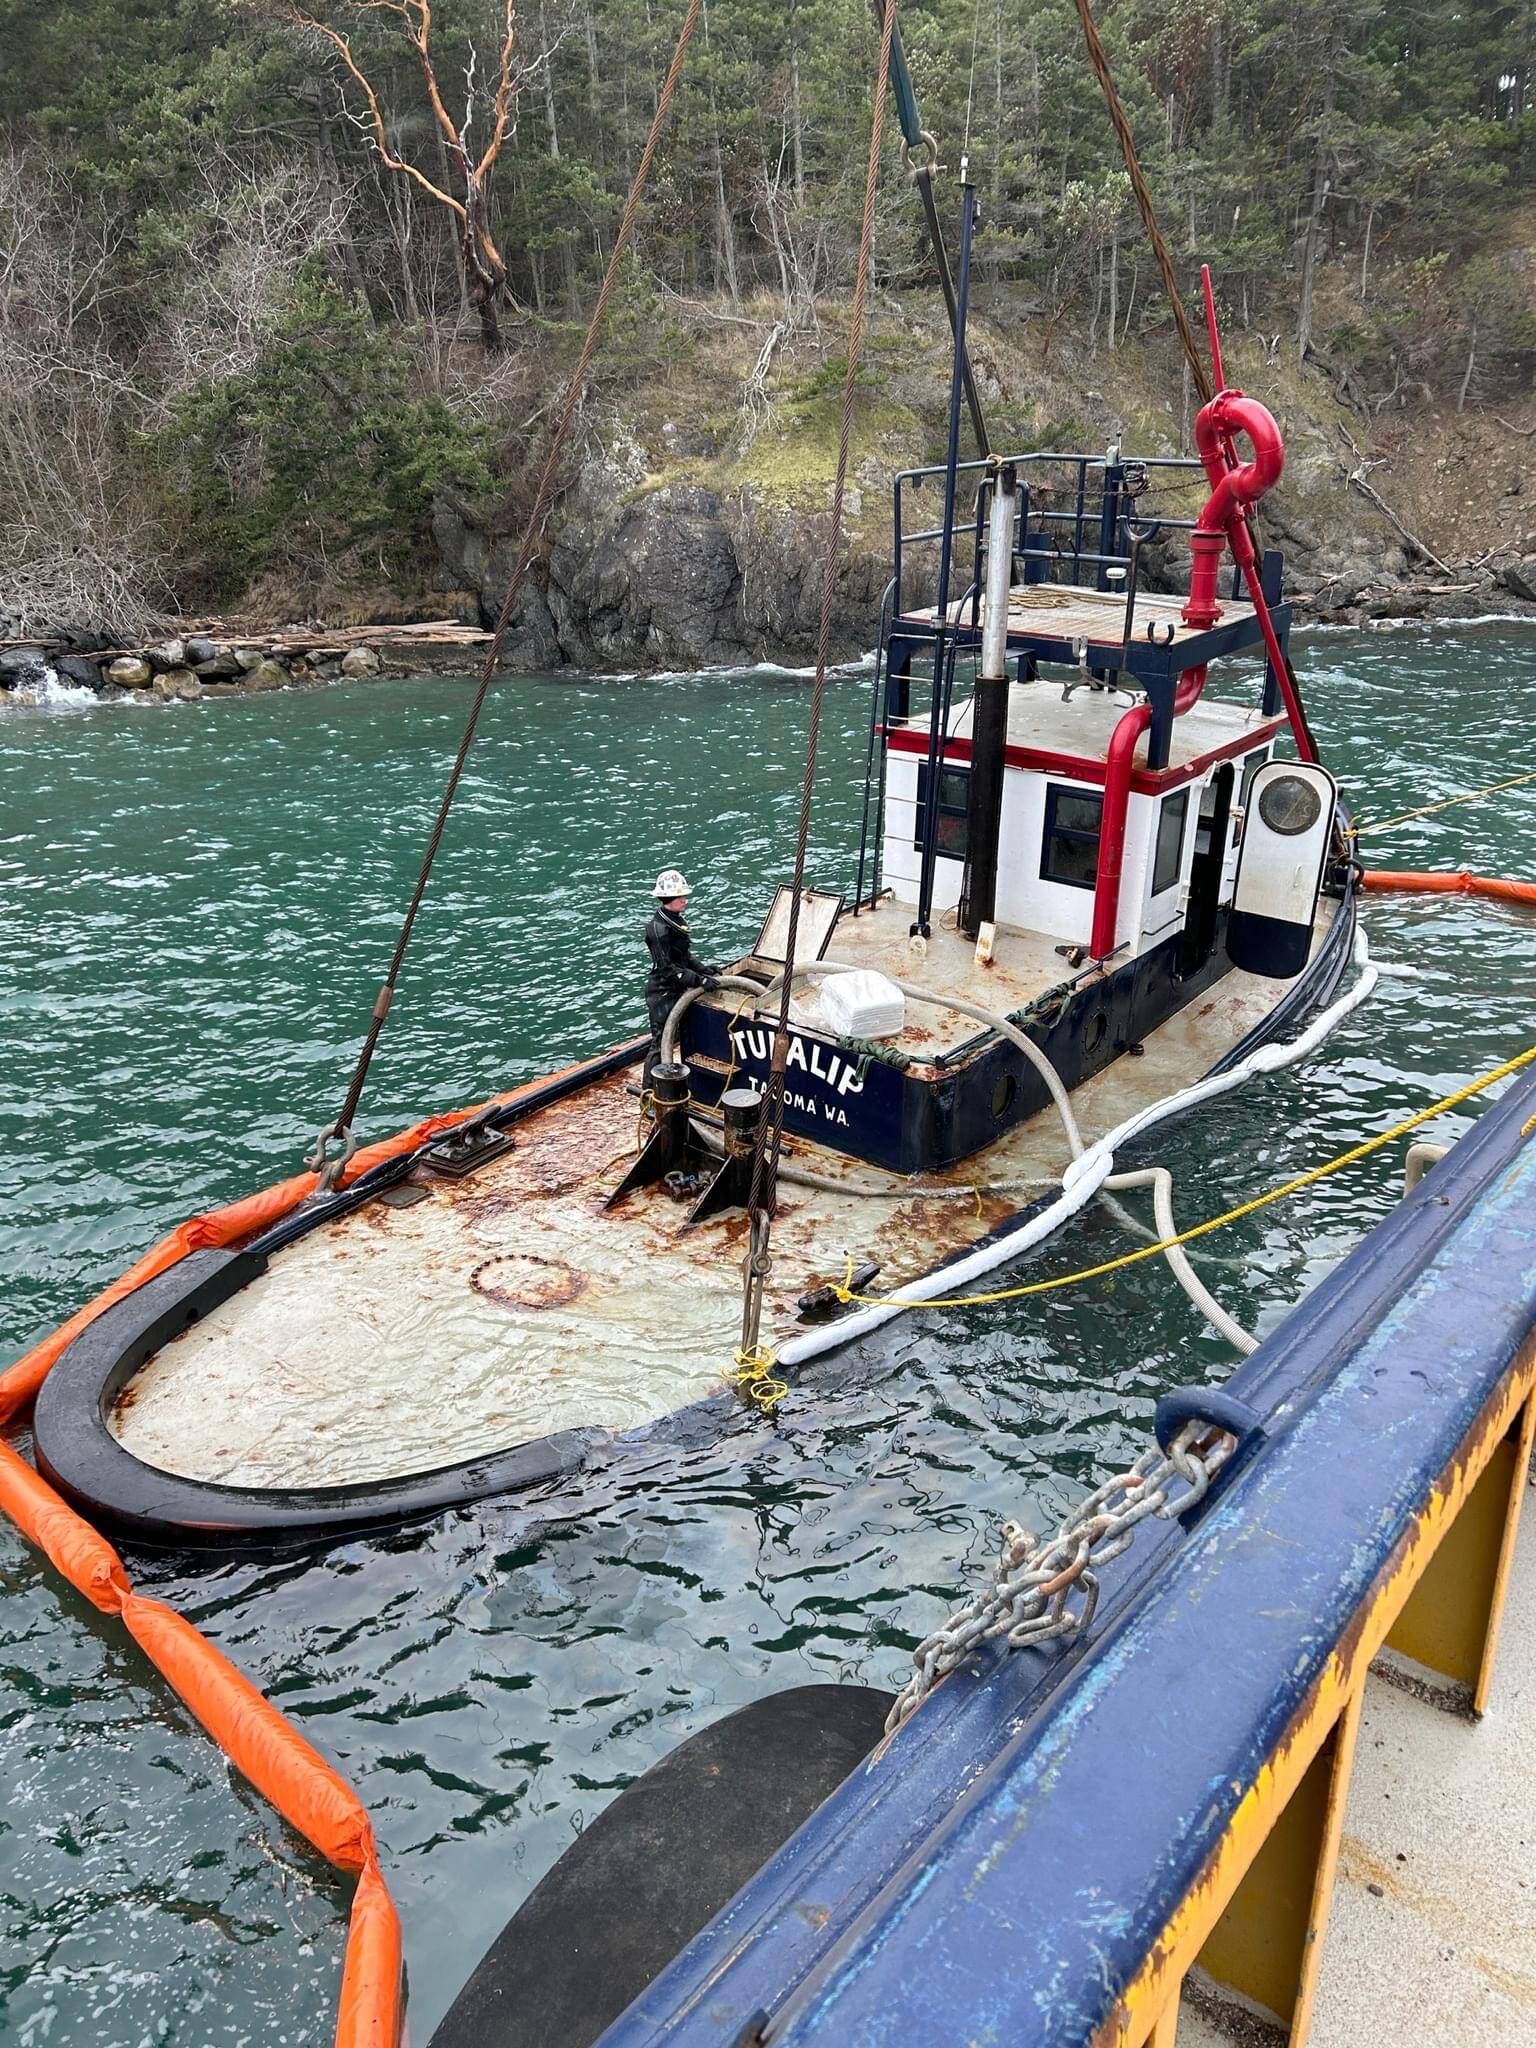 Contributed photo.
The partially submerged Tugboat Tulalip suspended alongside a response vessel near the ferry terminal in preparation for removal.